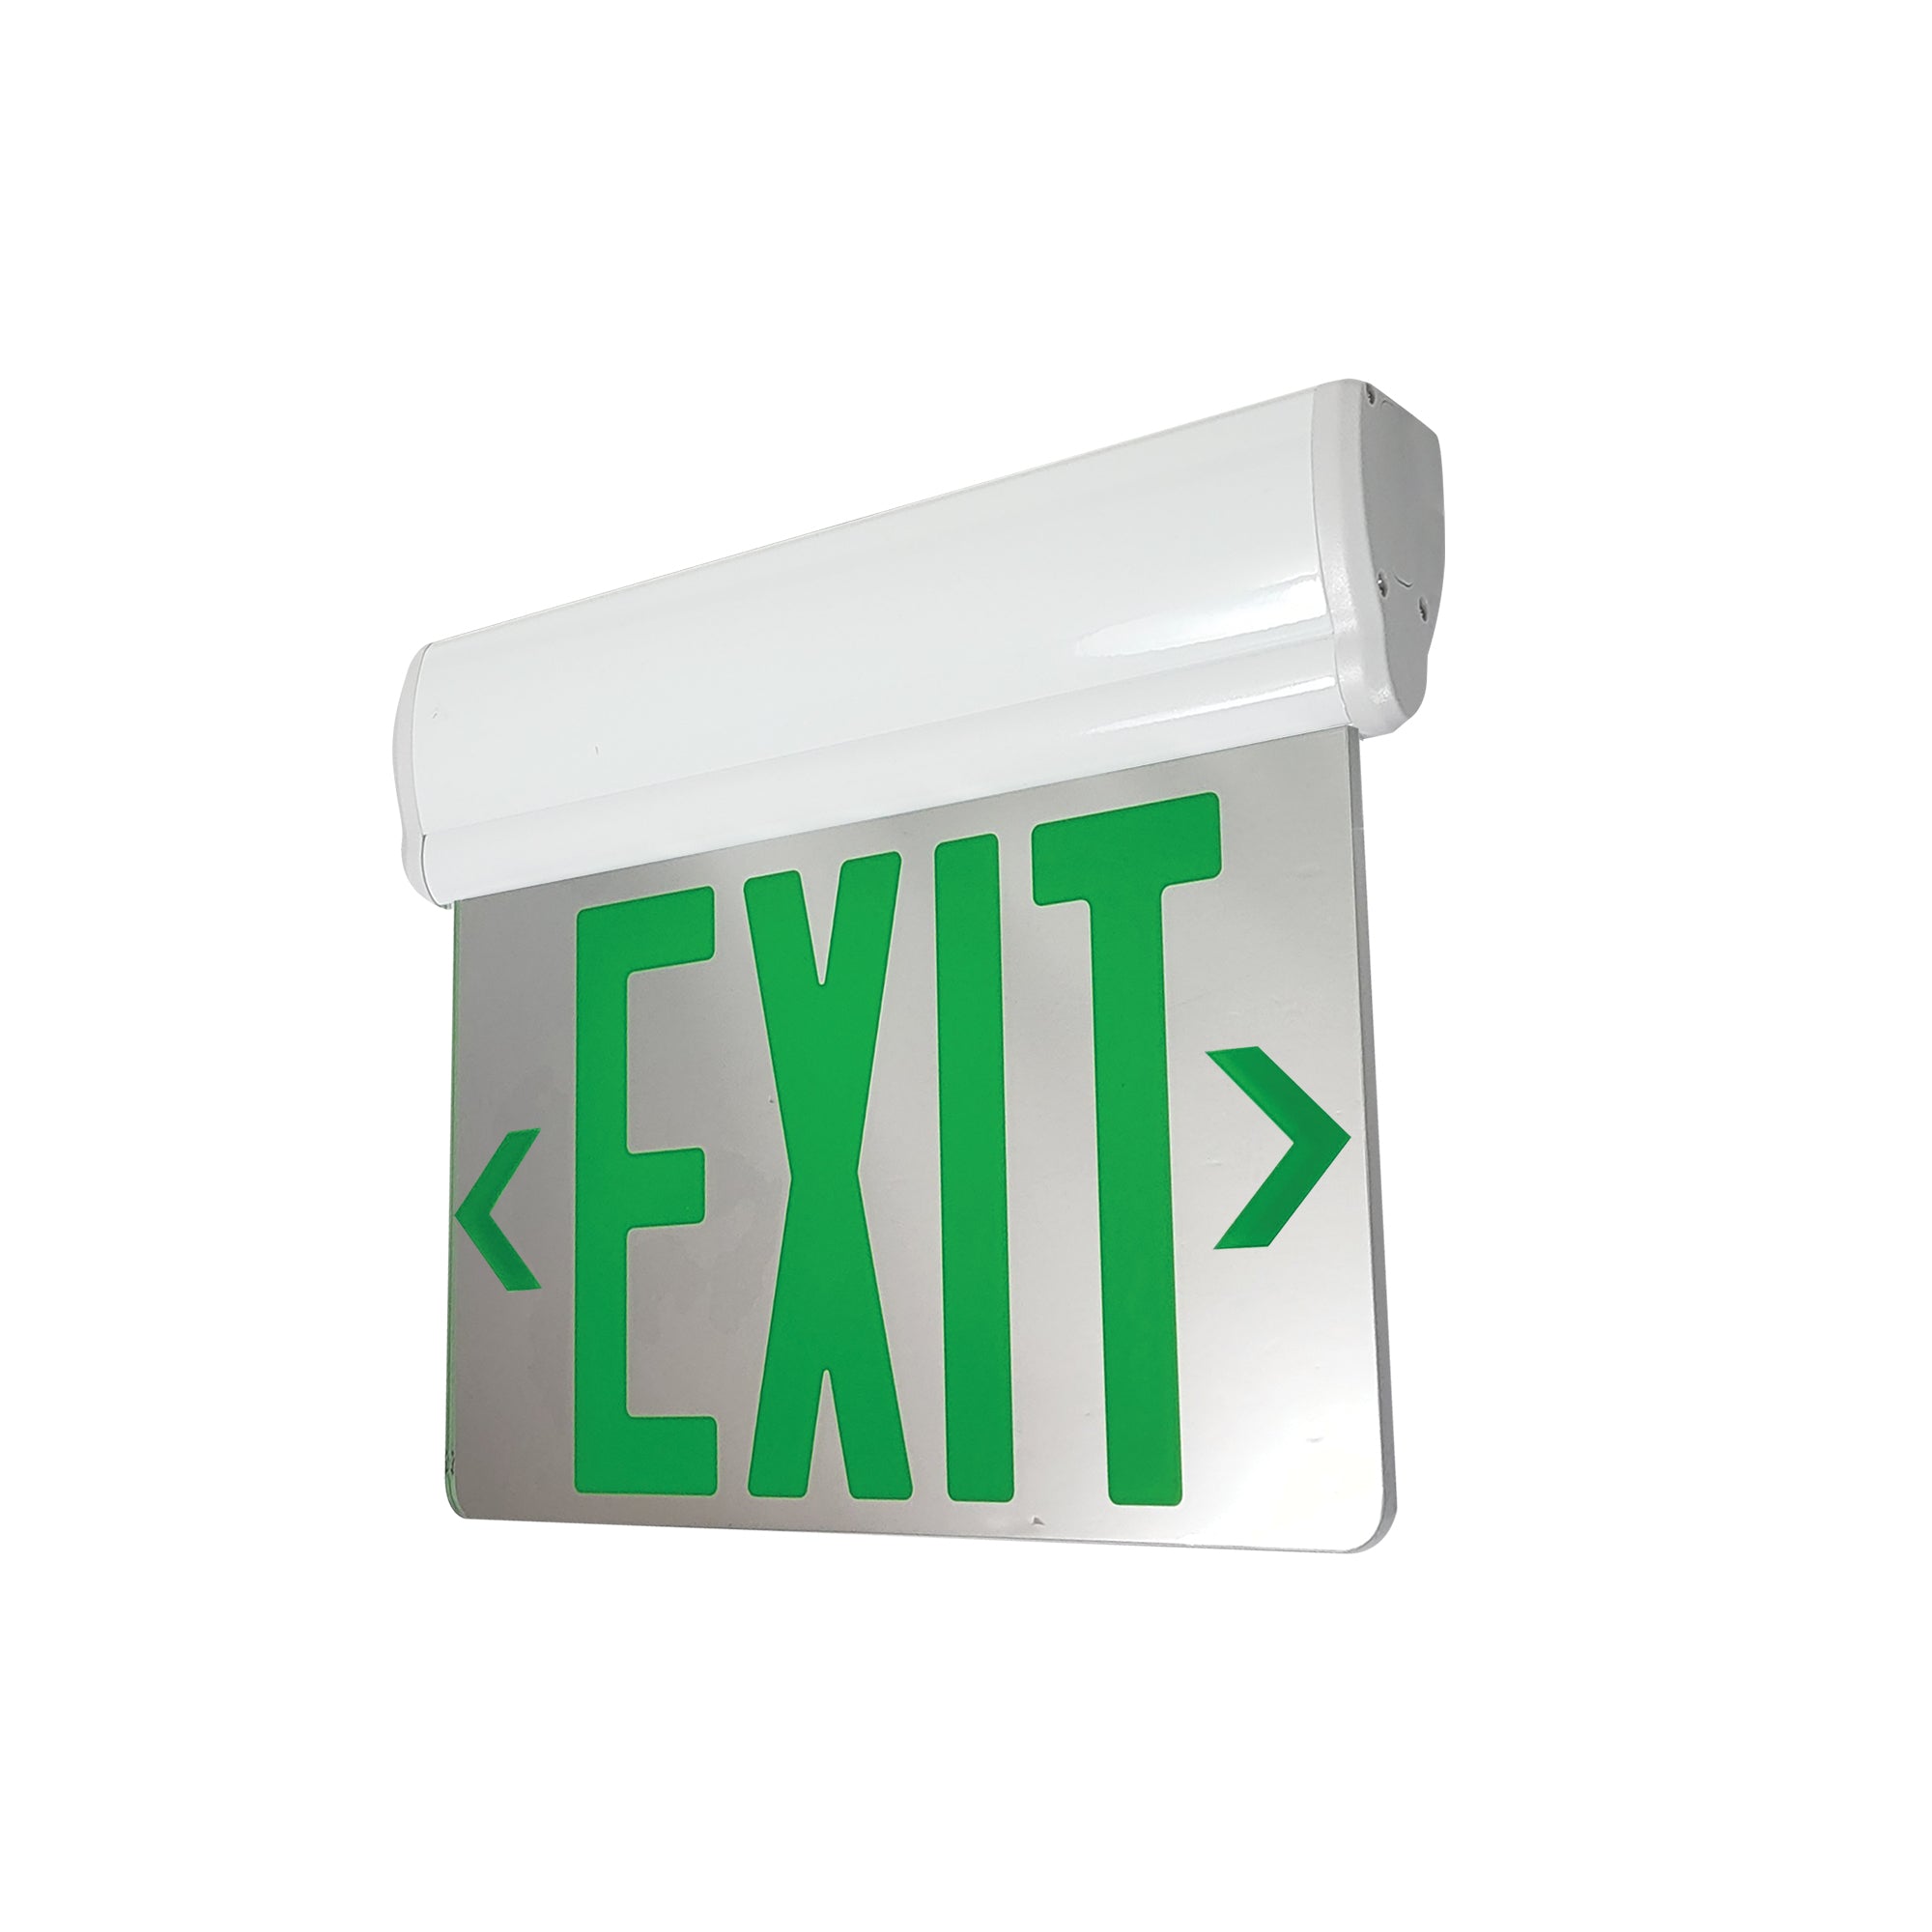 Nora Lighting NX-810-LEDGMW - Exit / Emergency - Surface Adjustable LED Edge-Lit Exit Sign, AC Only, 6 Inch Green Letters, Single Face / Mirrored Acrylic, White Housing